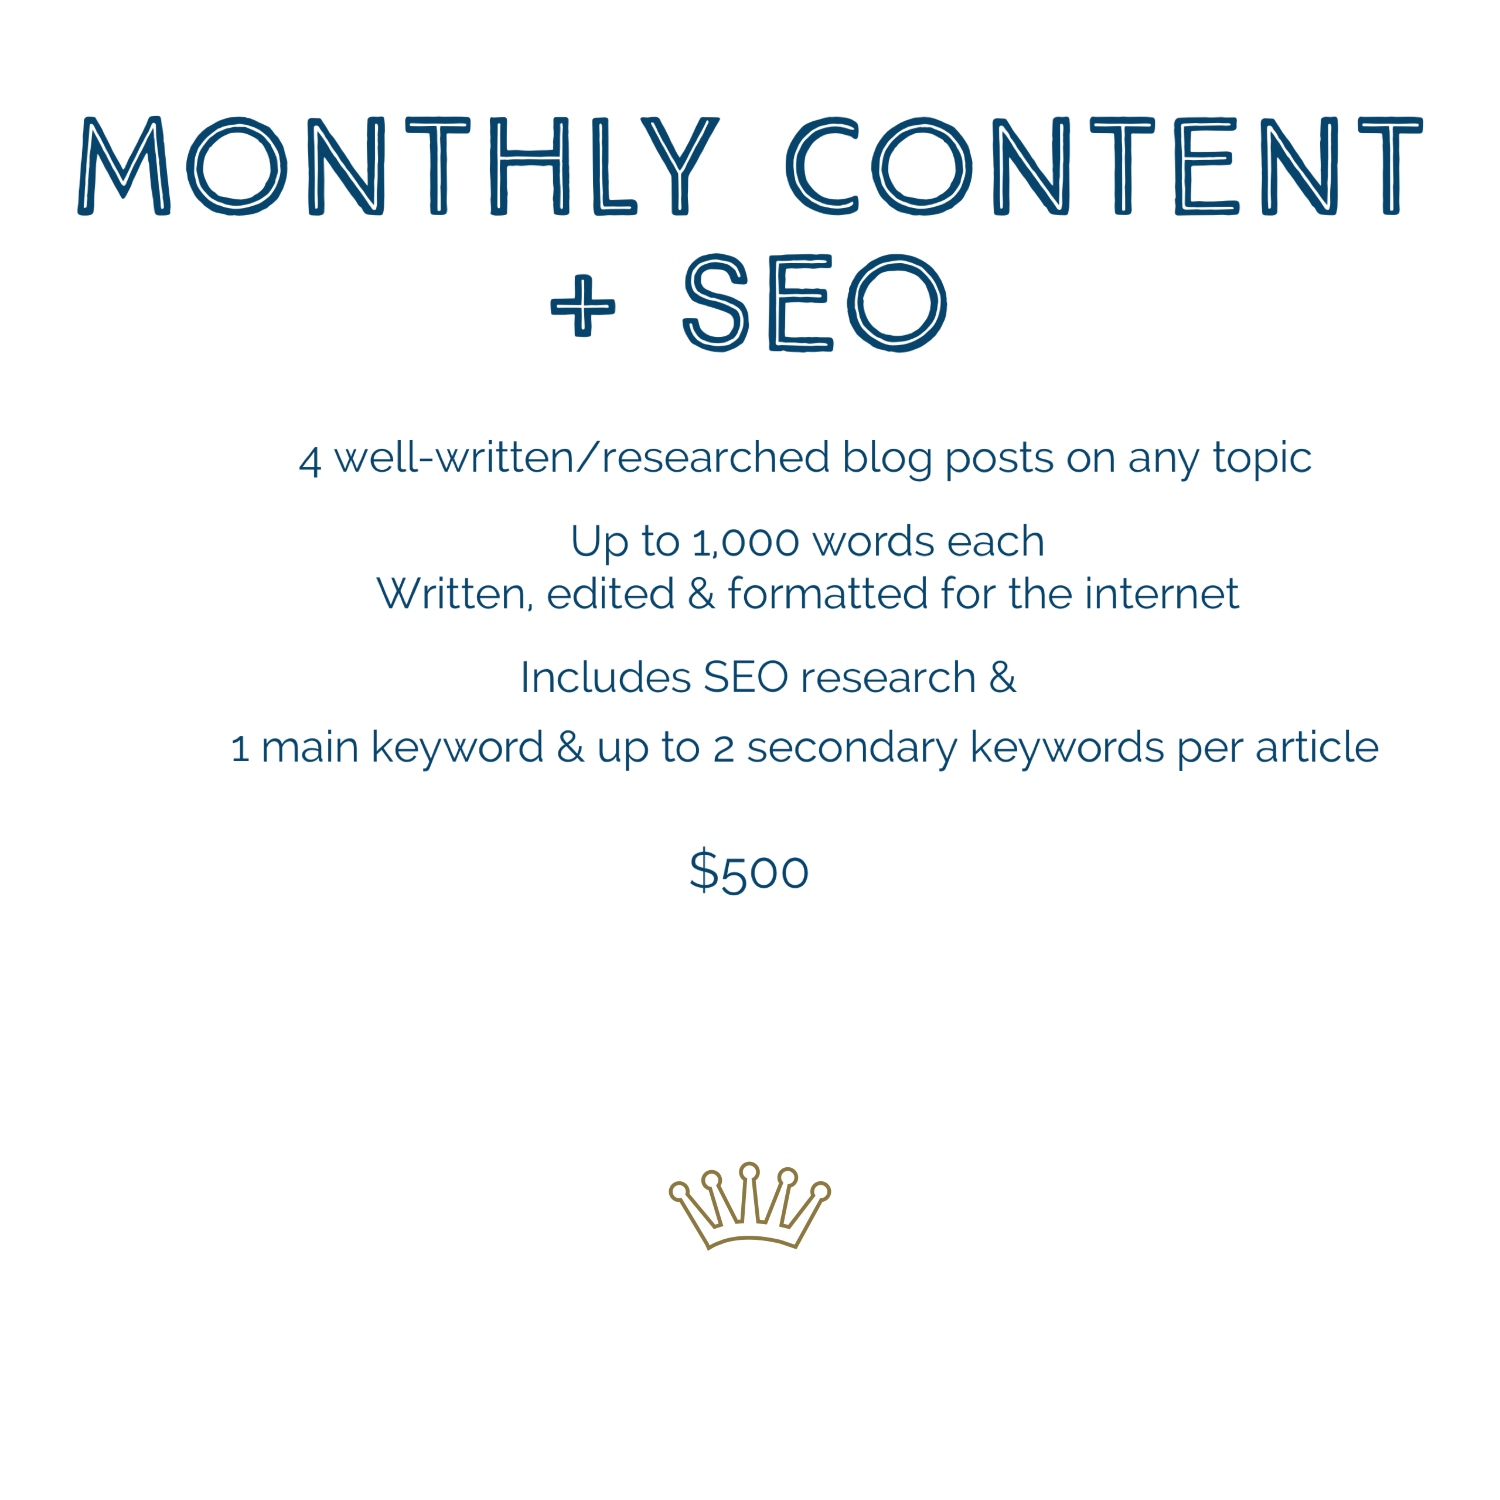 content seo services - monthly content + seo